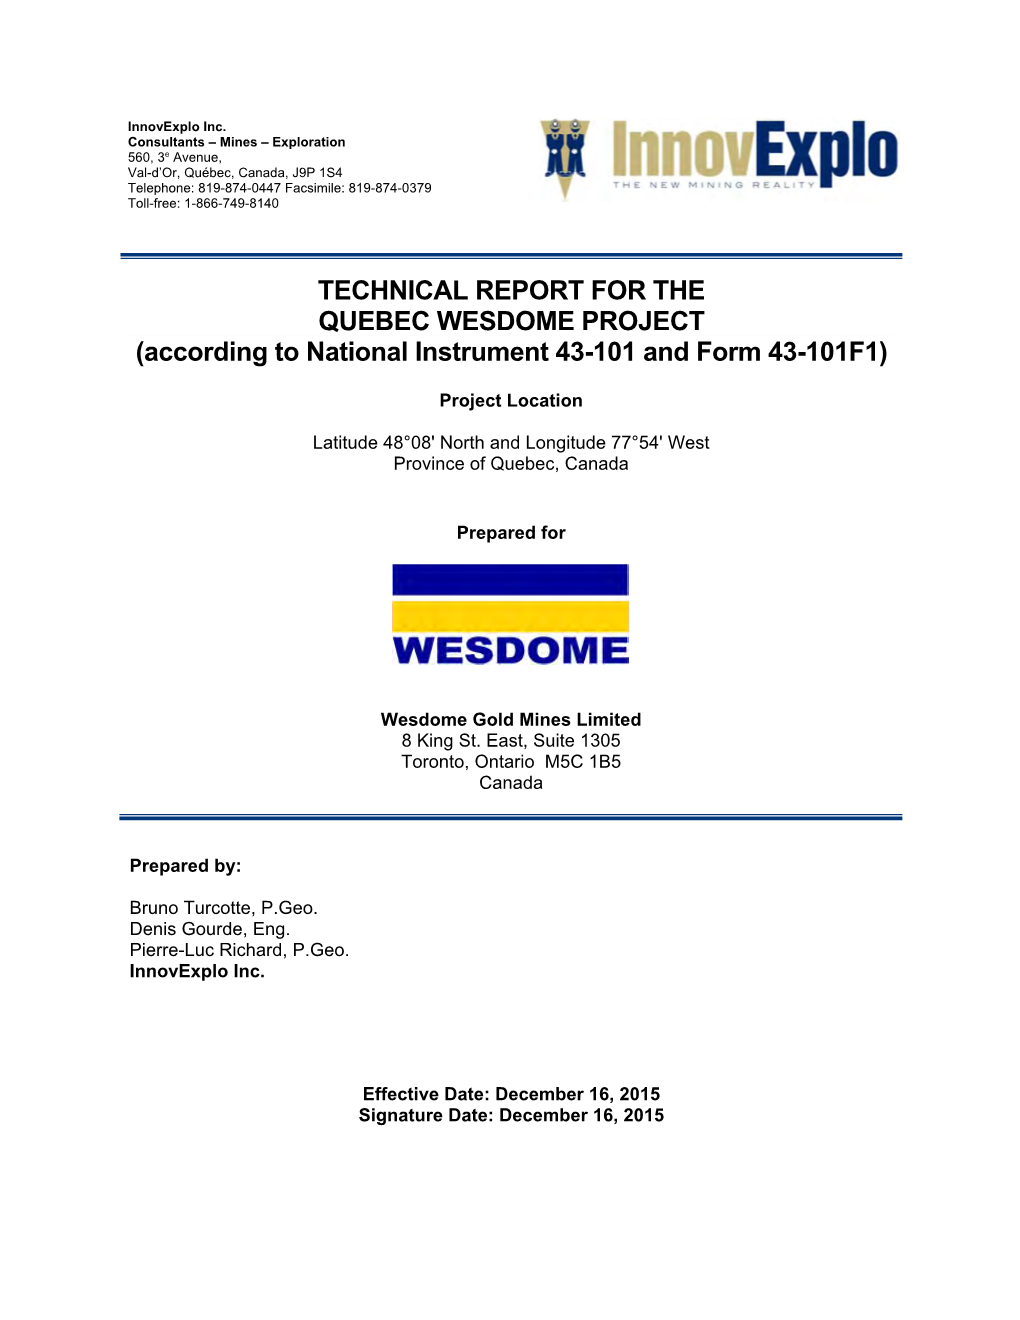 TECHNICAL REPORT for the QUEBEC WESDOME PROJECT (According to National Instrument 43-101 and Form 43-101F1)